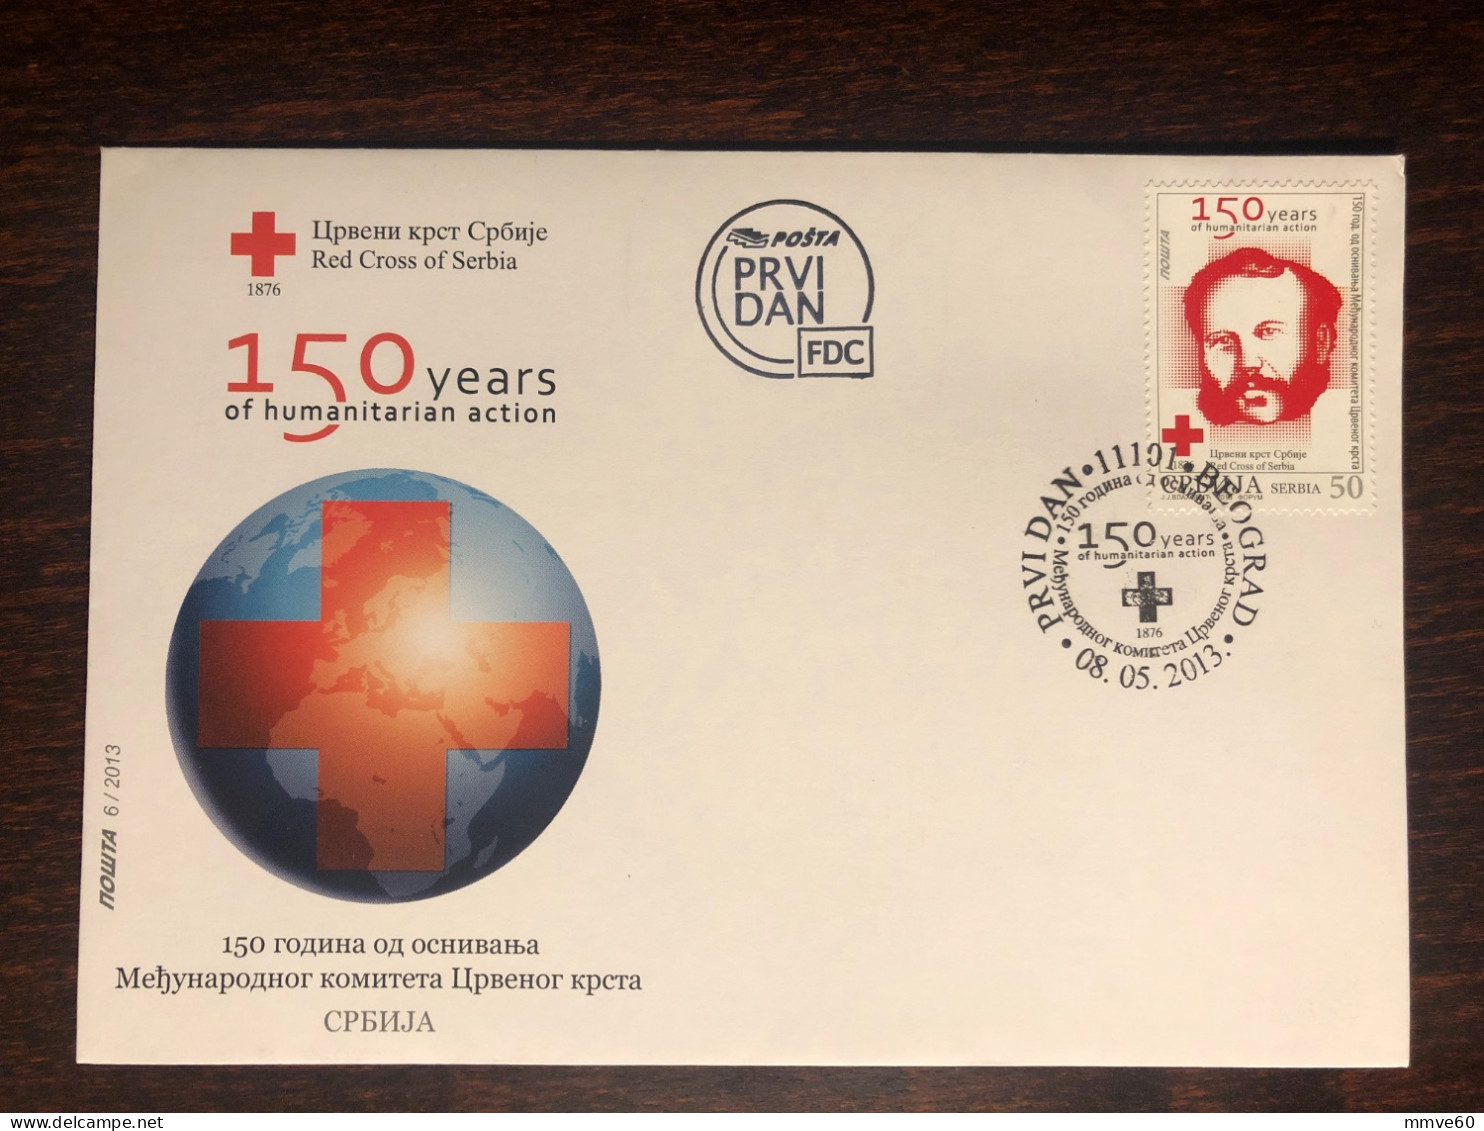 SERBIA FDC COVER 2013 YEAR RED CROSS DUNANT HEALTH MEDICINE STAMPS - Serbien